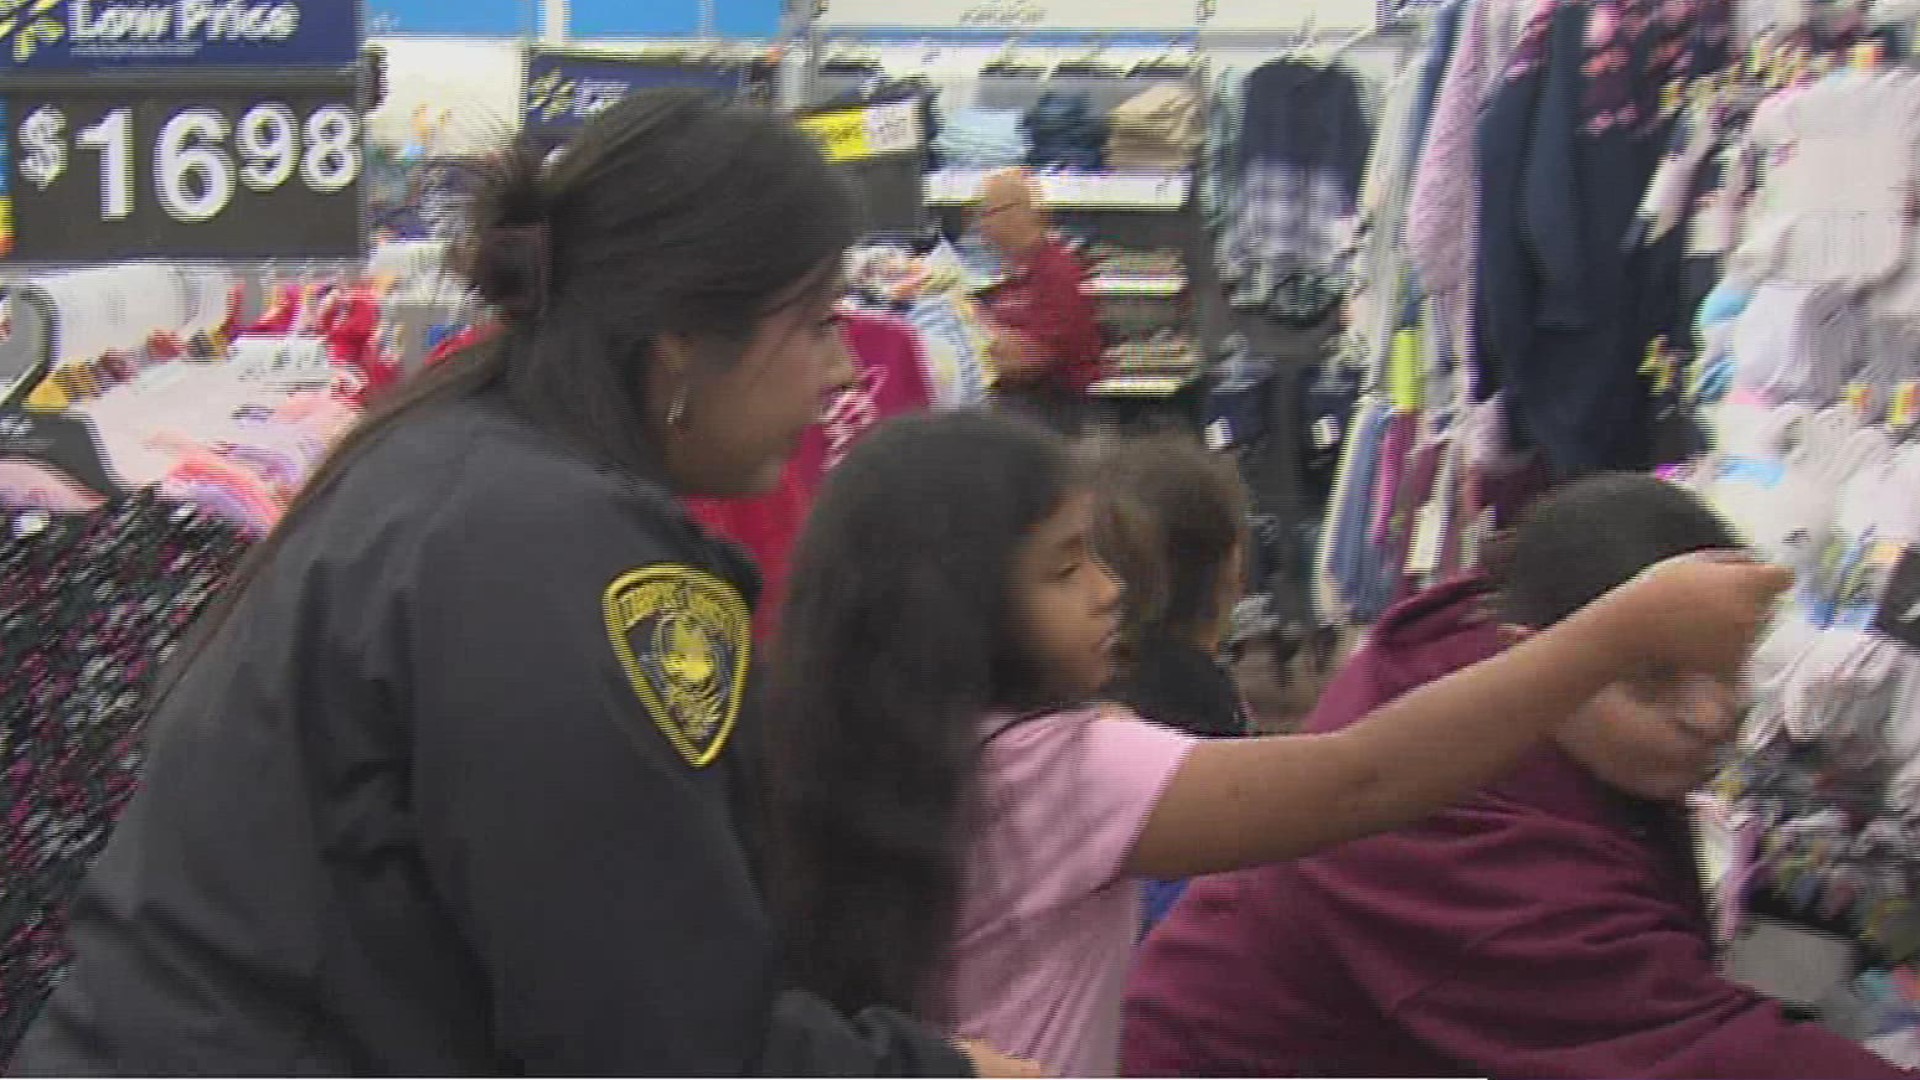 Senior CCPD officer Javier Cantu told 3NEWS that the event means just as much to them as it does to the children.